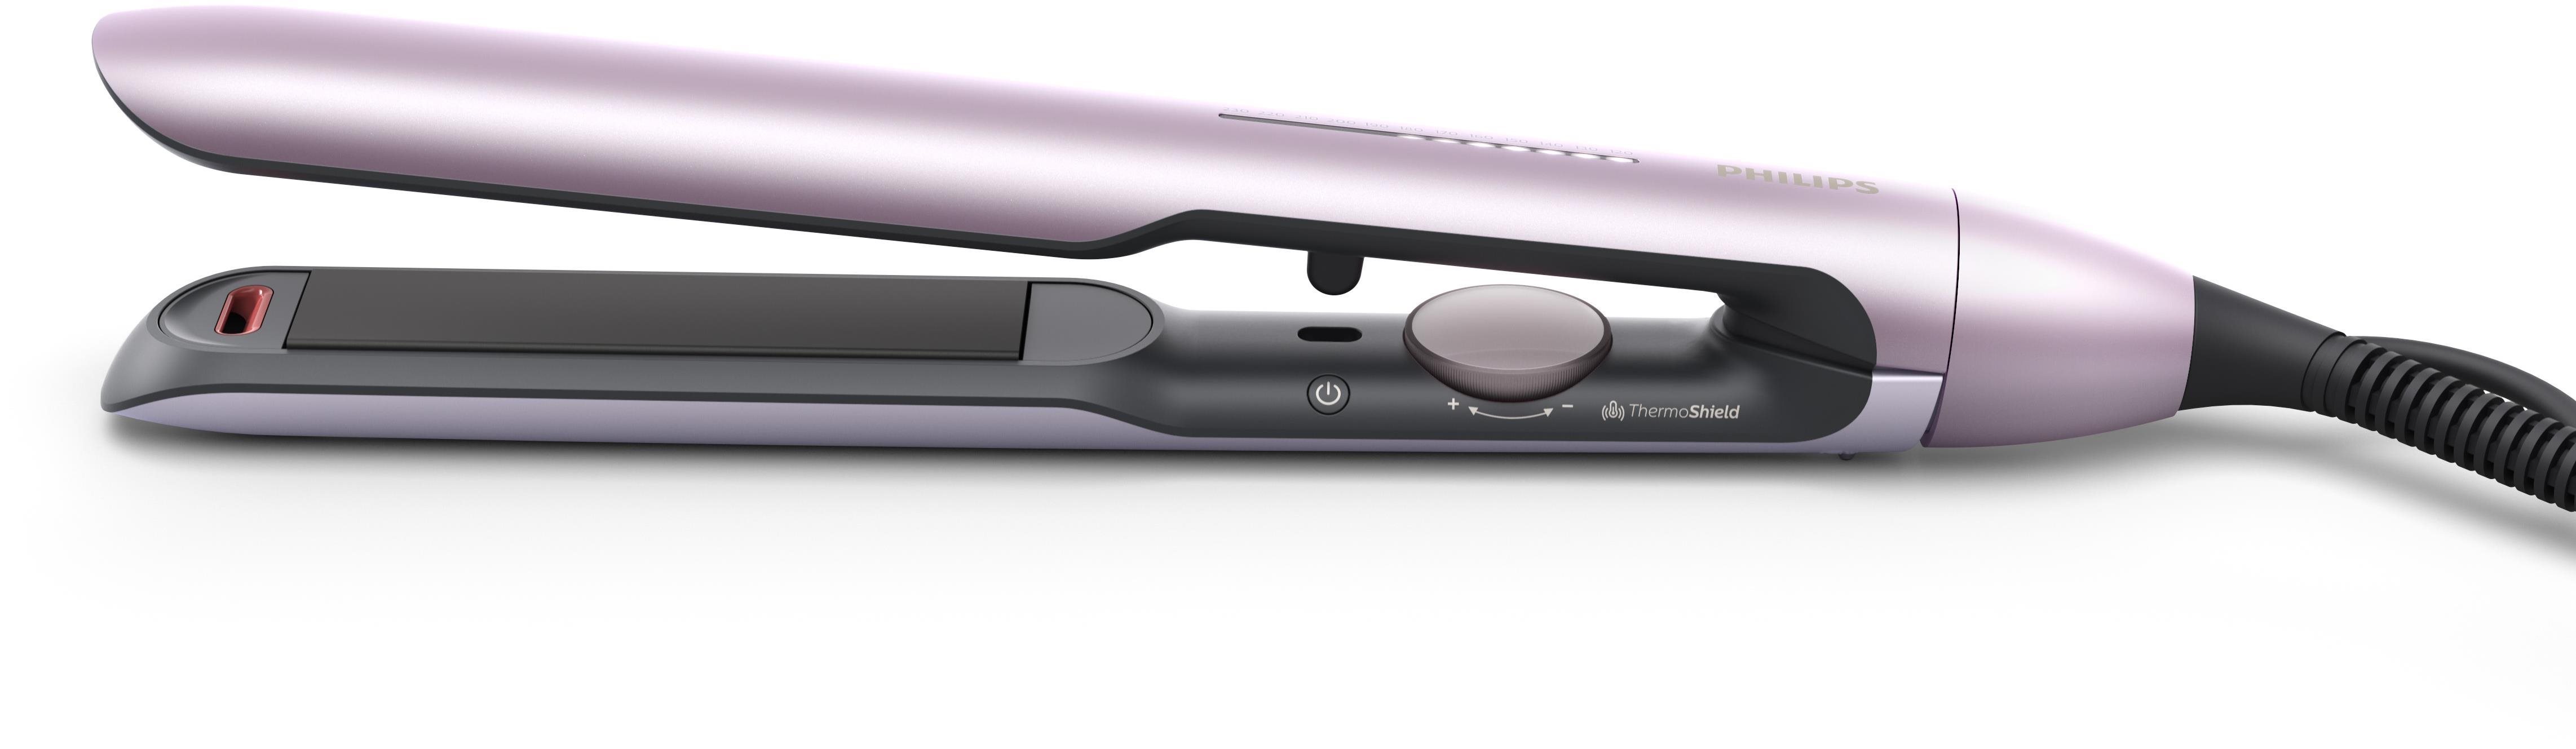 Flat Iron Philips Series 5000 BHS530/00 Lateral view